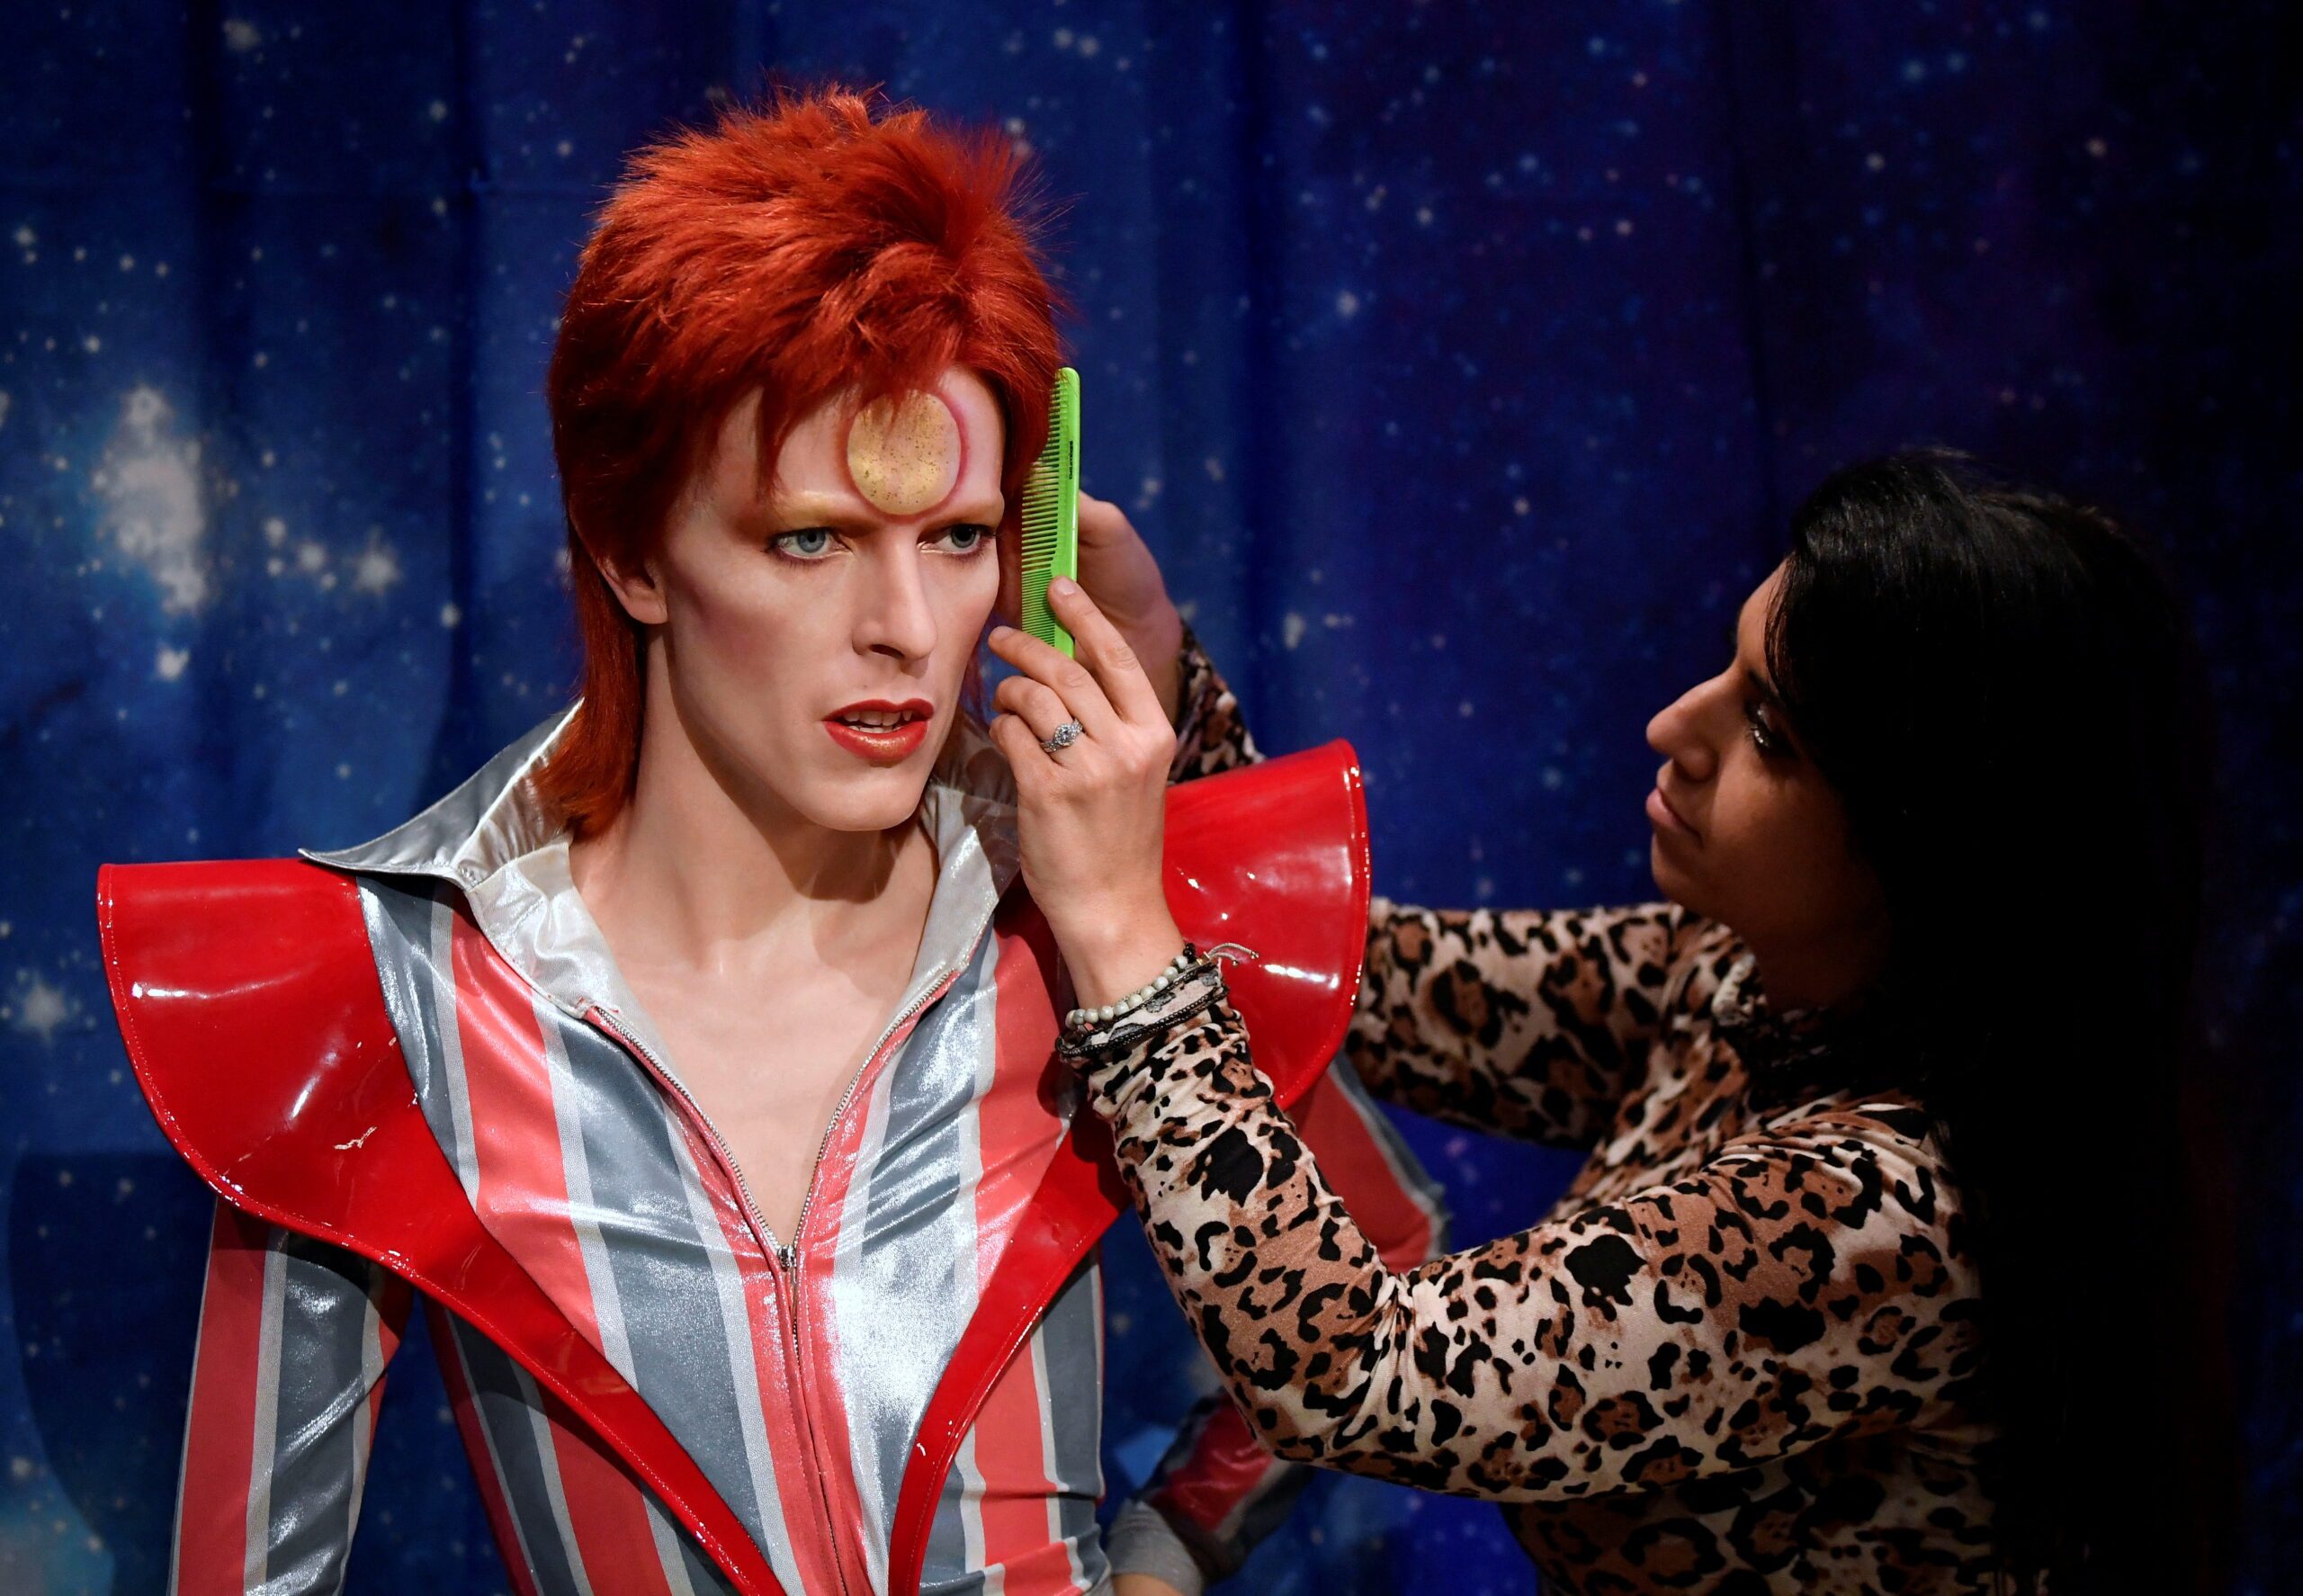 New David Bowie wax figure unveiled at London Madame Tussauds